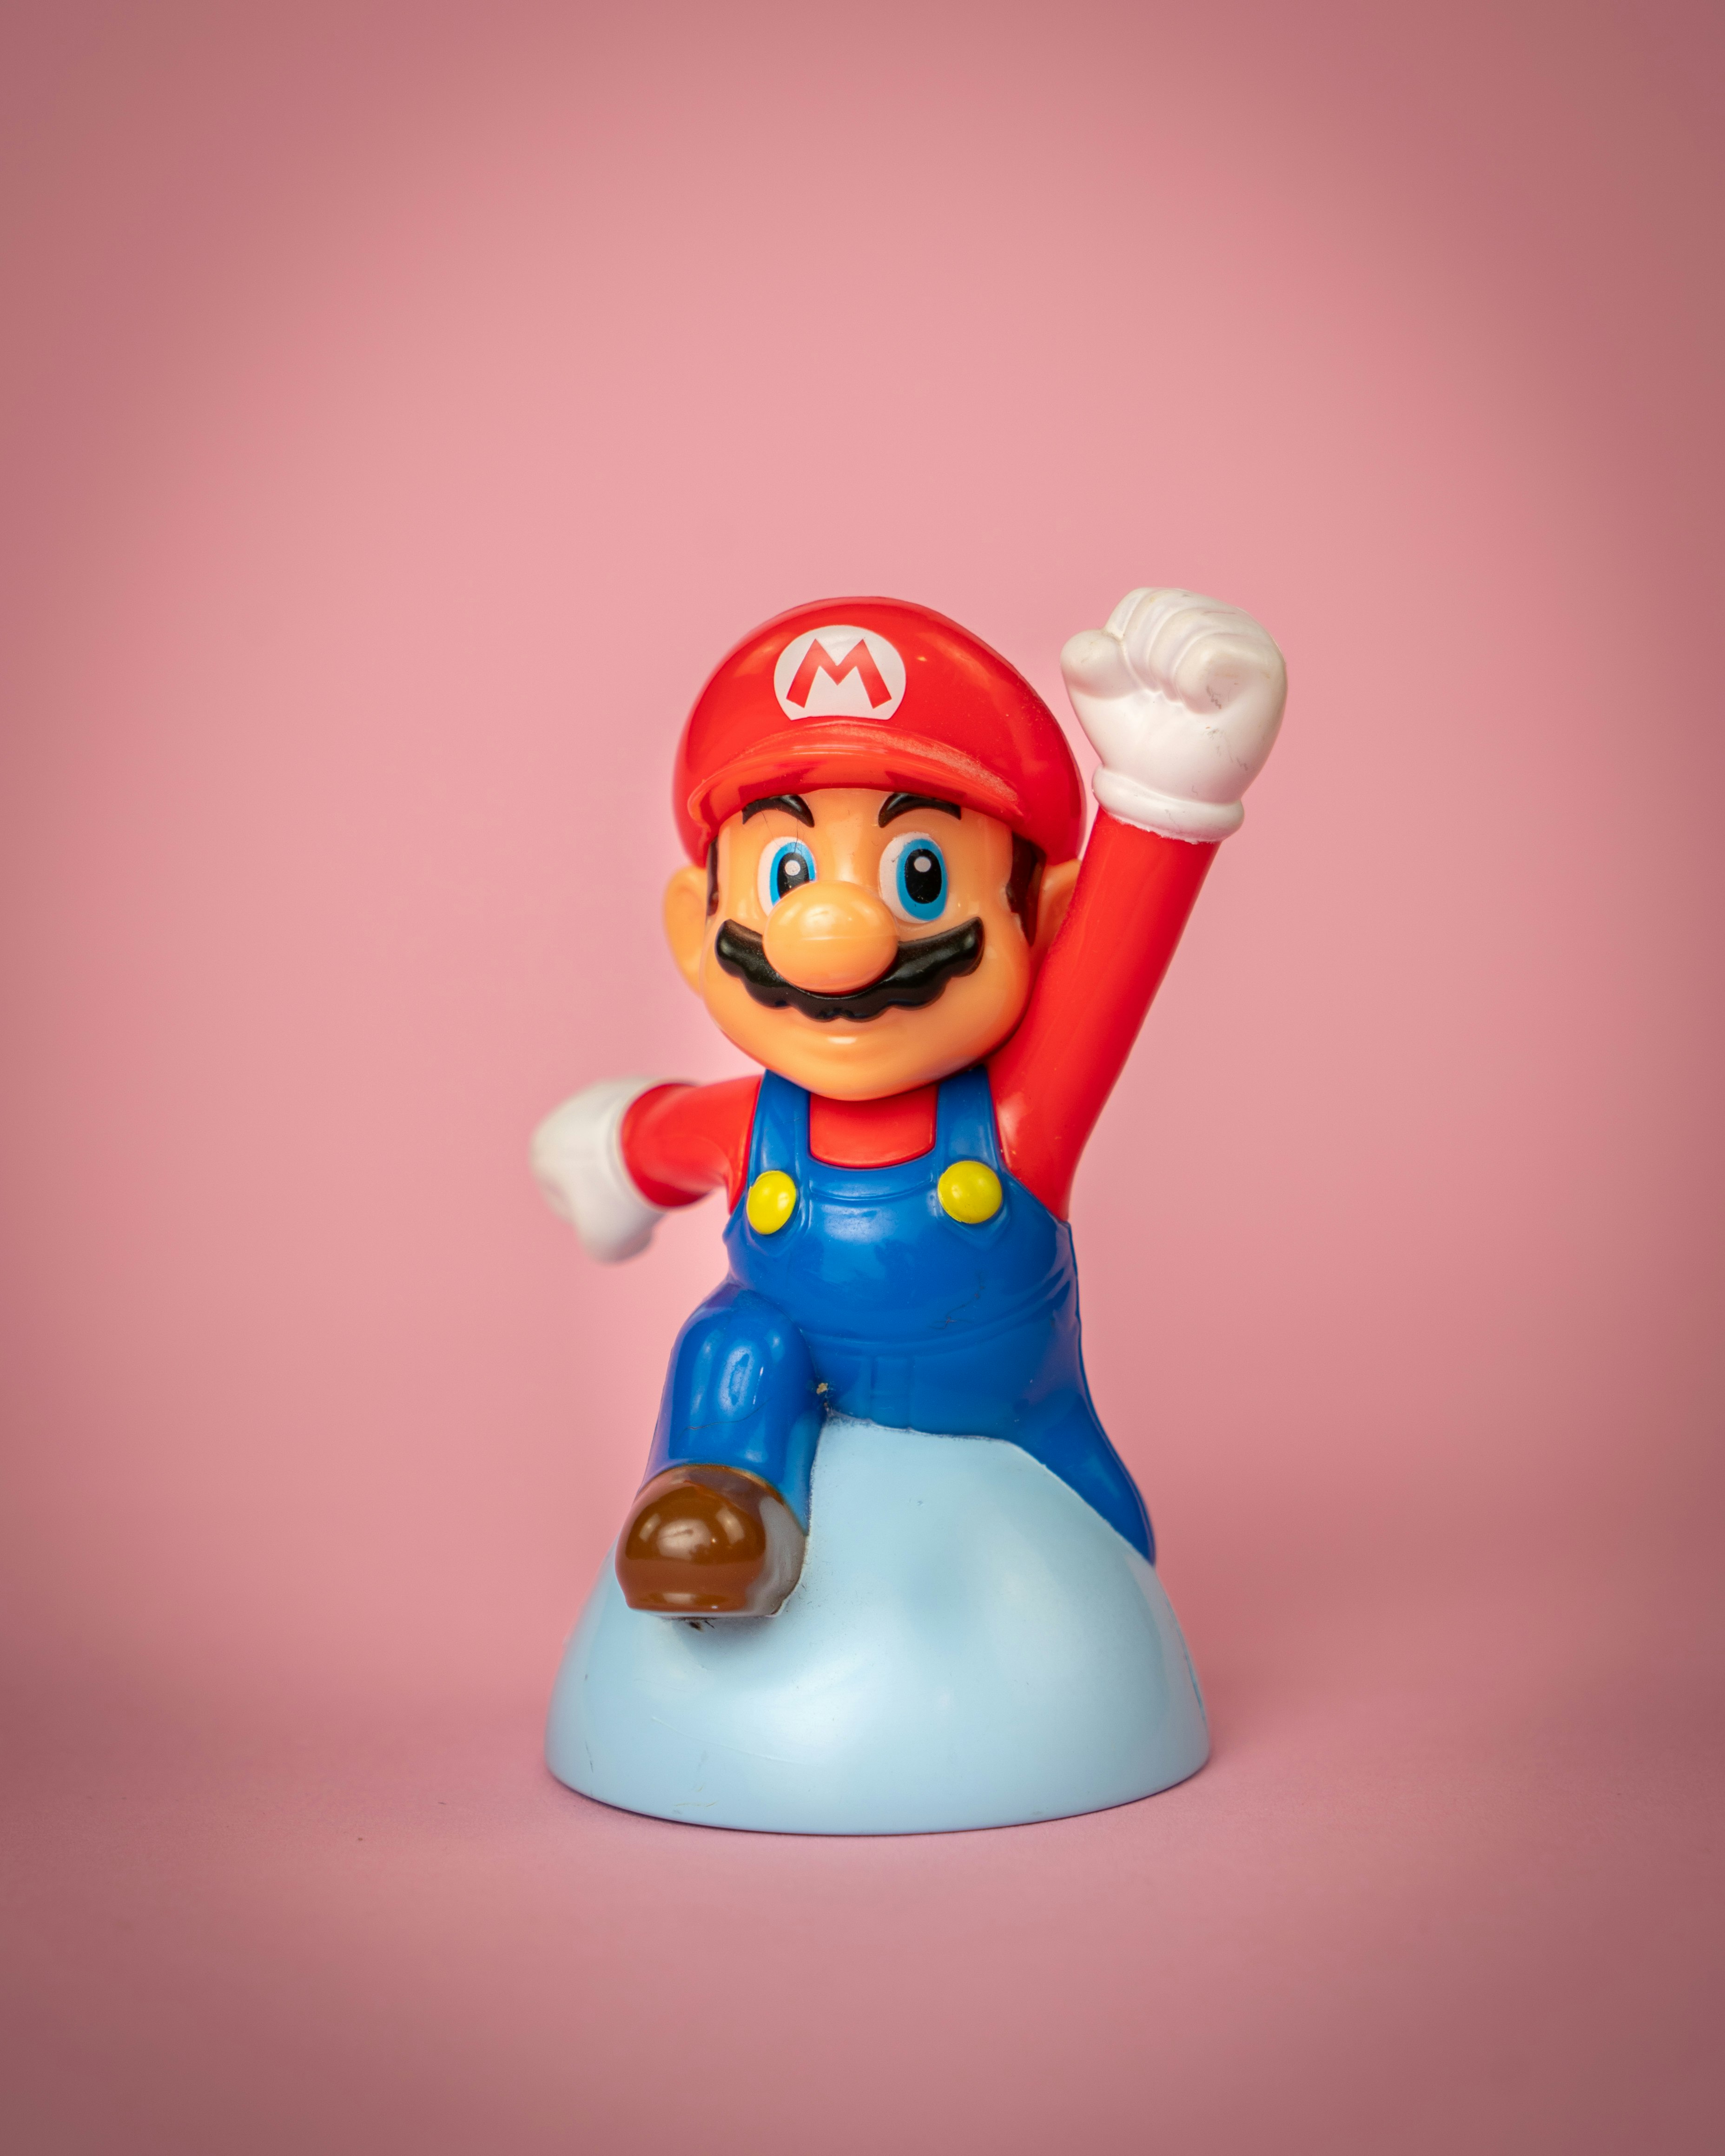 A Super Mario statue, given out by Nintendo on the Gamescom. You can see him in his classic jumping pose,.